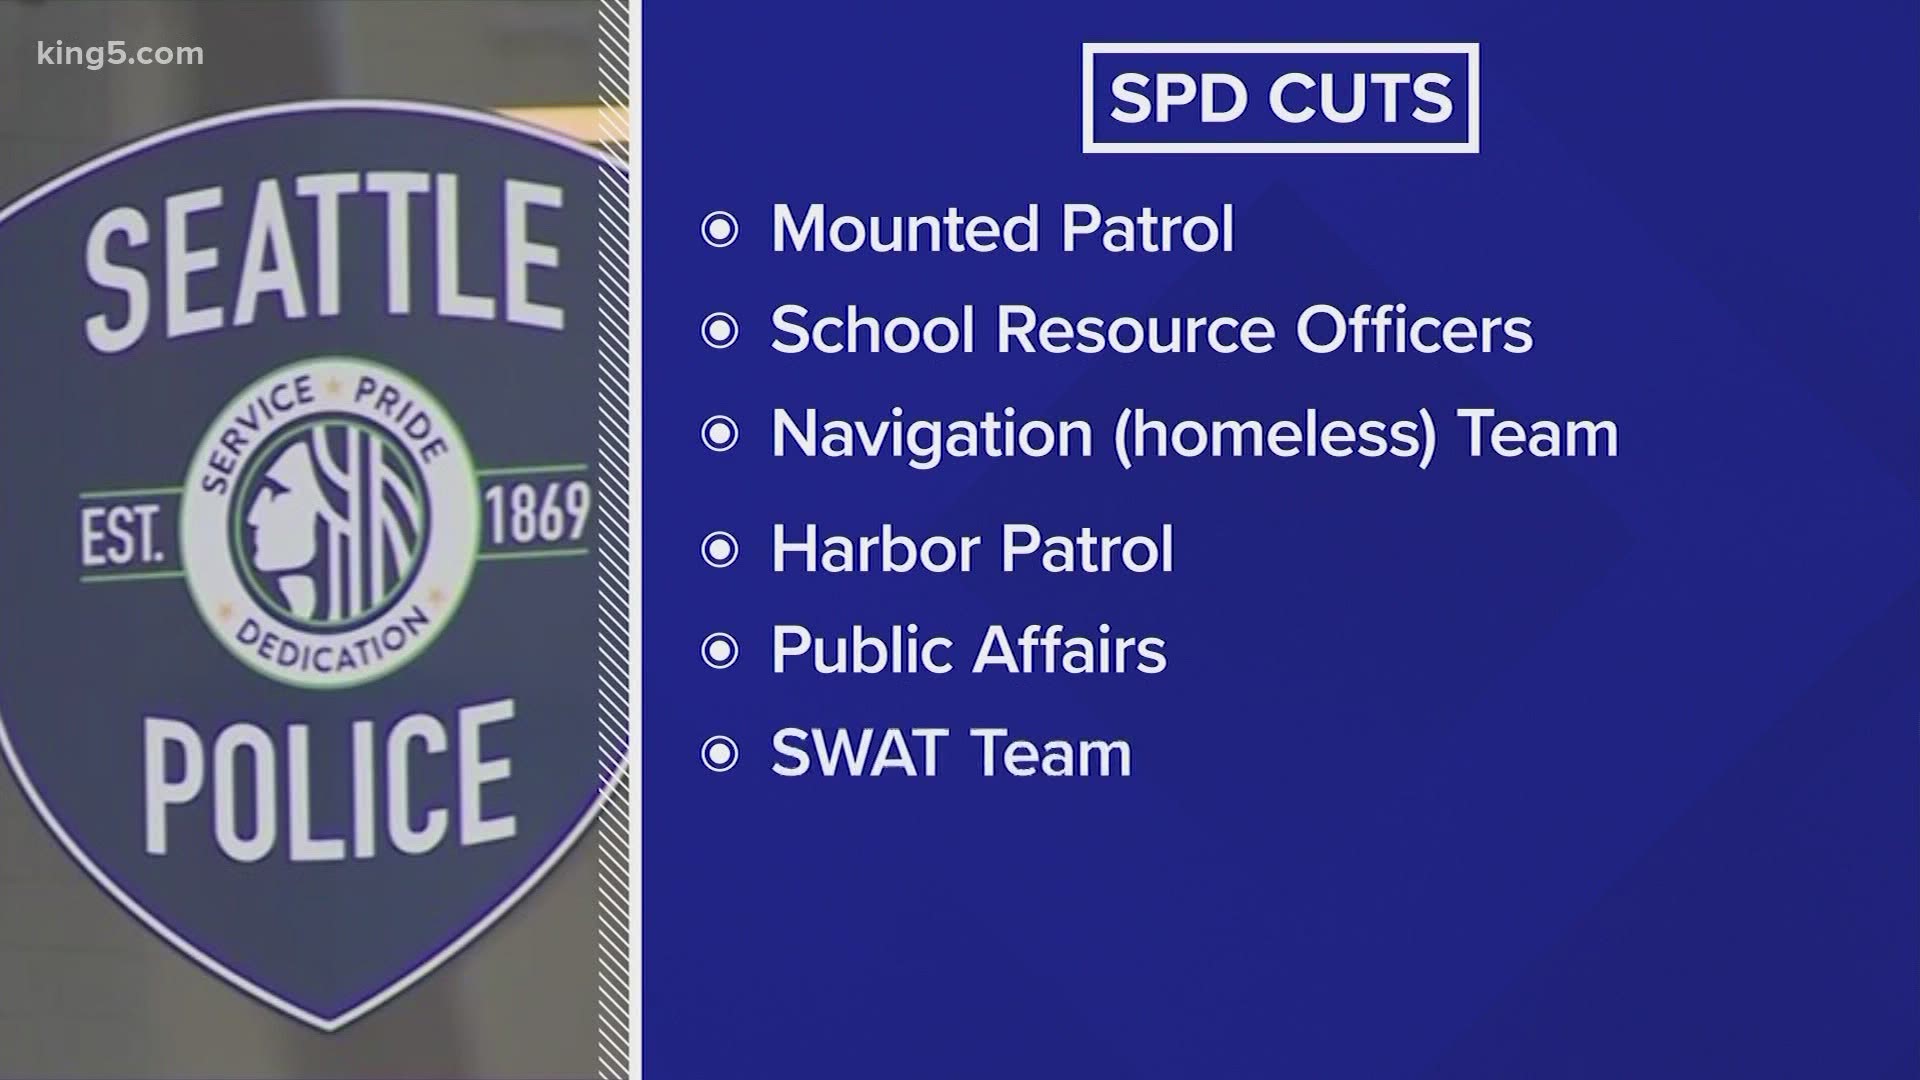 The Seattle City Council voted to trim the police budget by more than $3 million, which is far less than the 50% defunding that protesters were seeking.